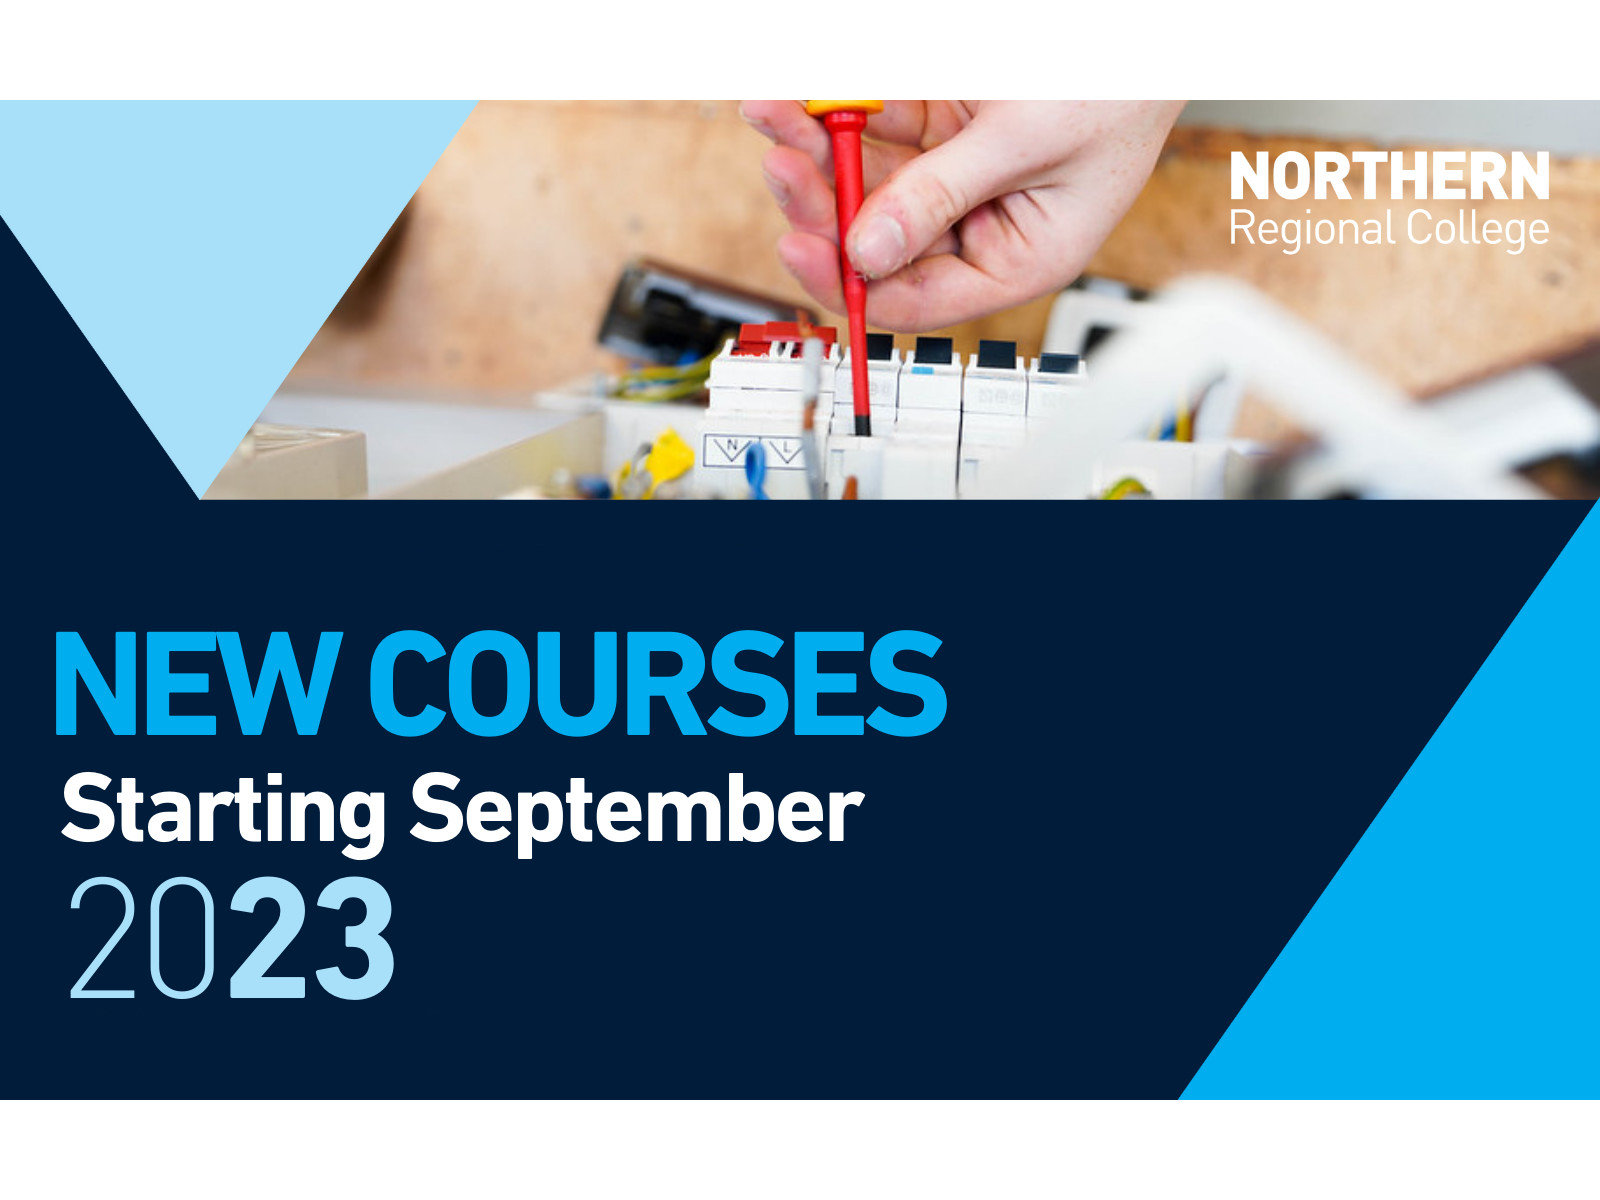 New course for September 2023